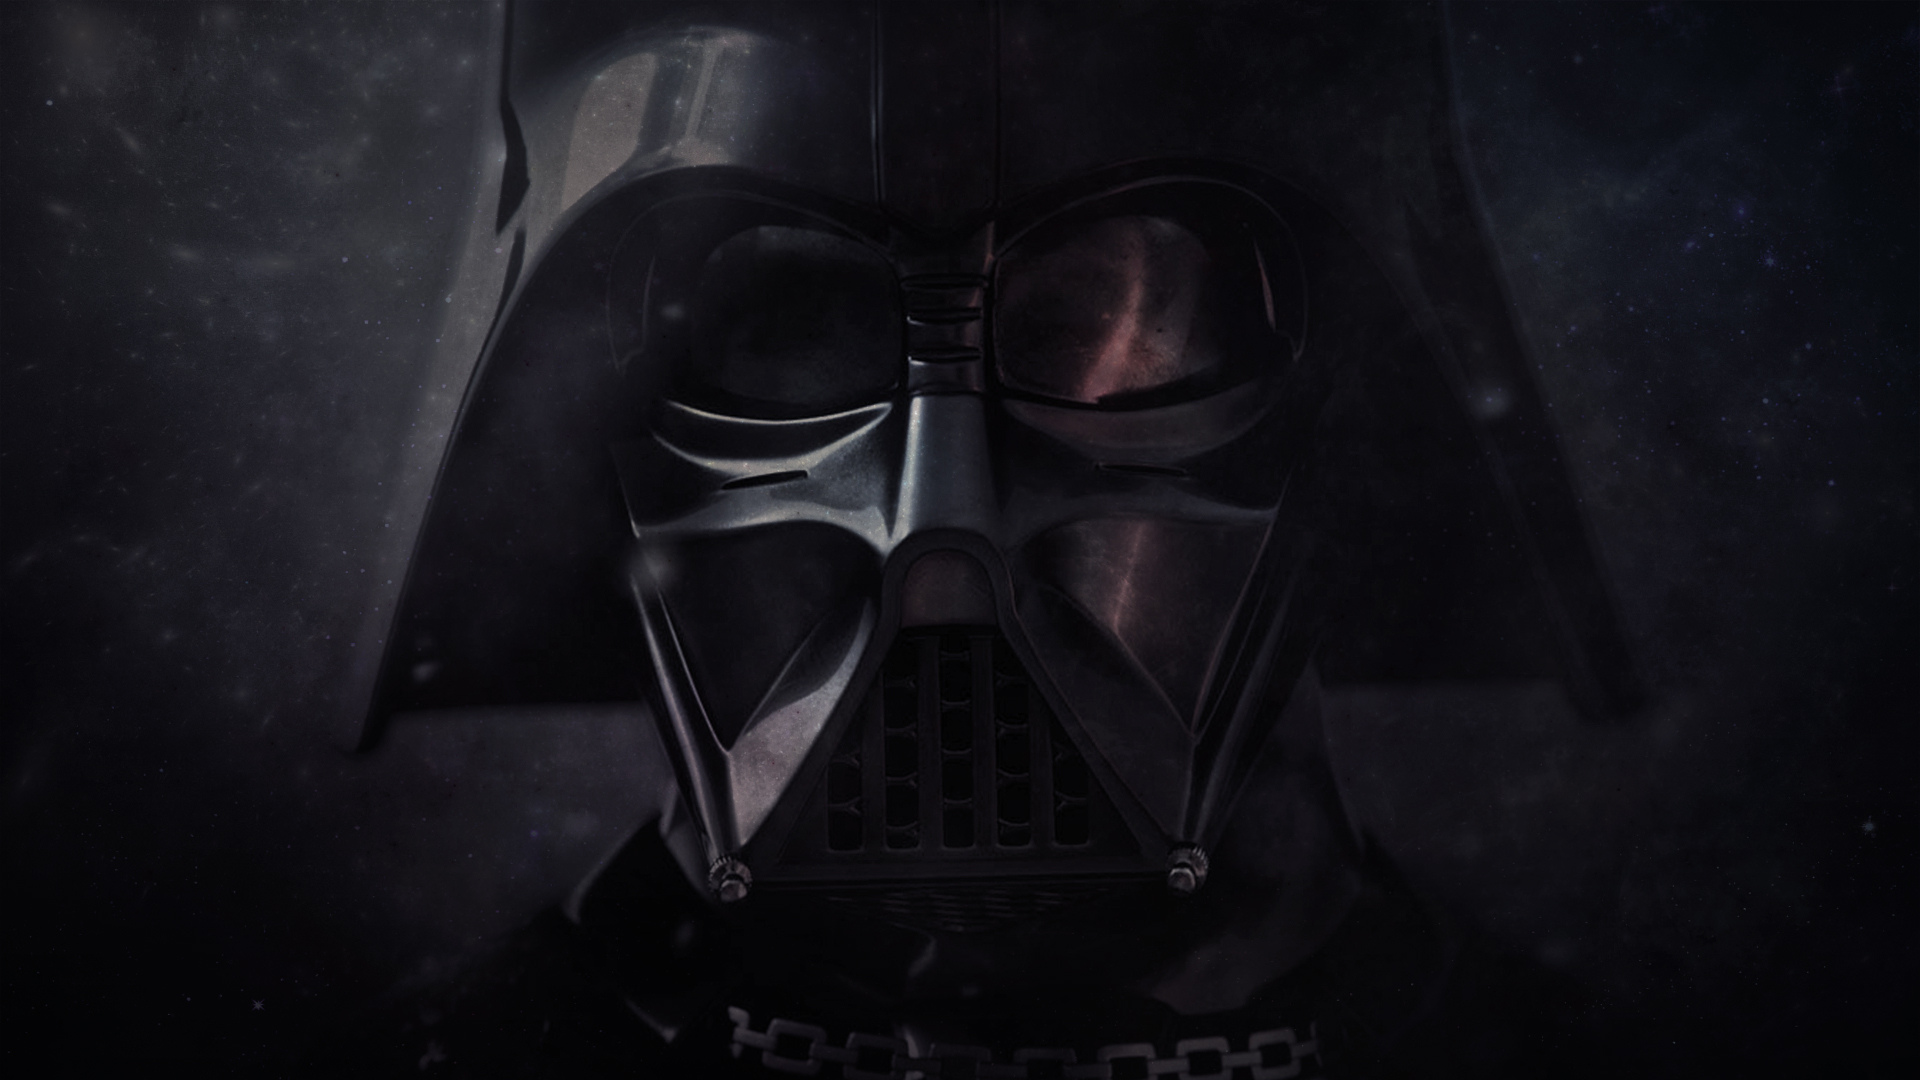 Wallpaper 1080p : Darth Vader by ~iamsointense on...